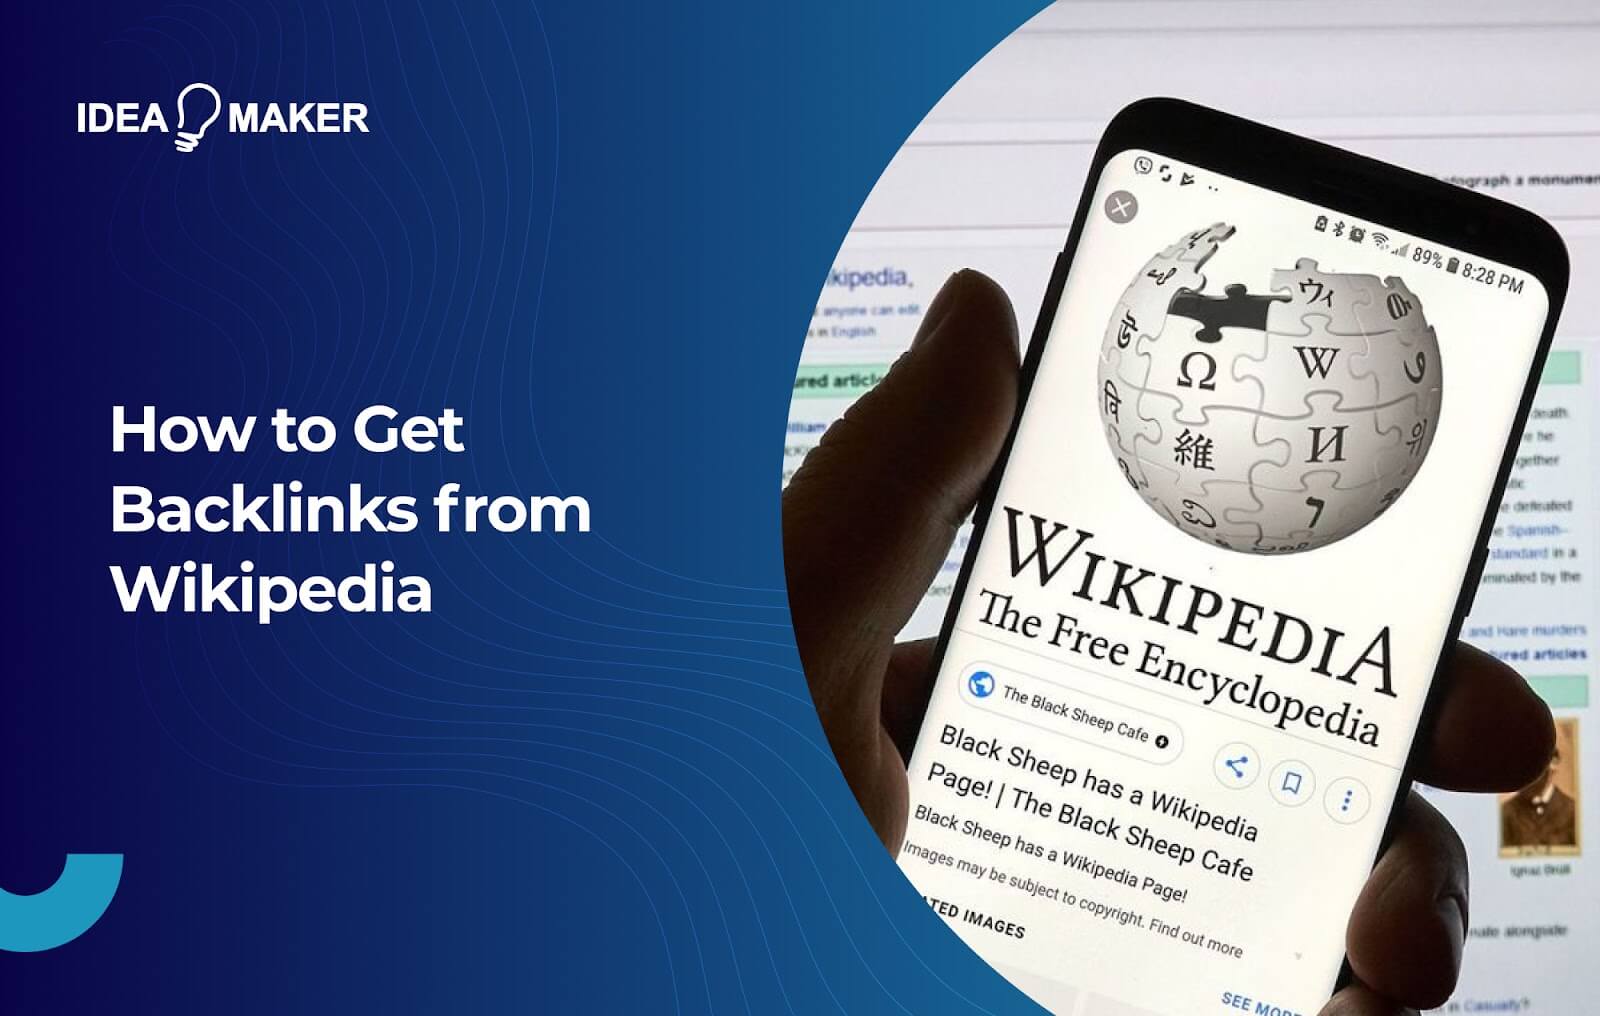 Ideamaker - How to Get Backlinks from Wikipedia